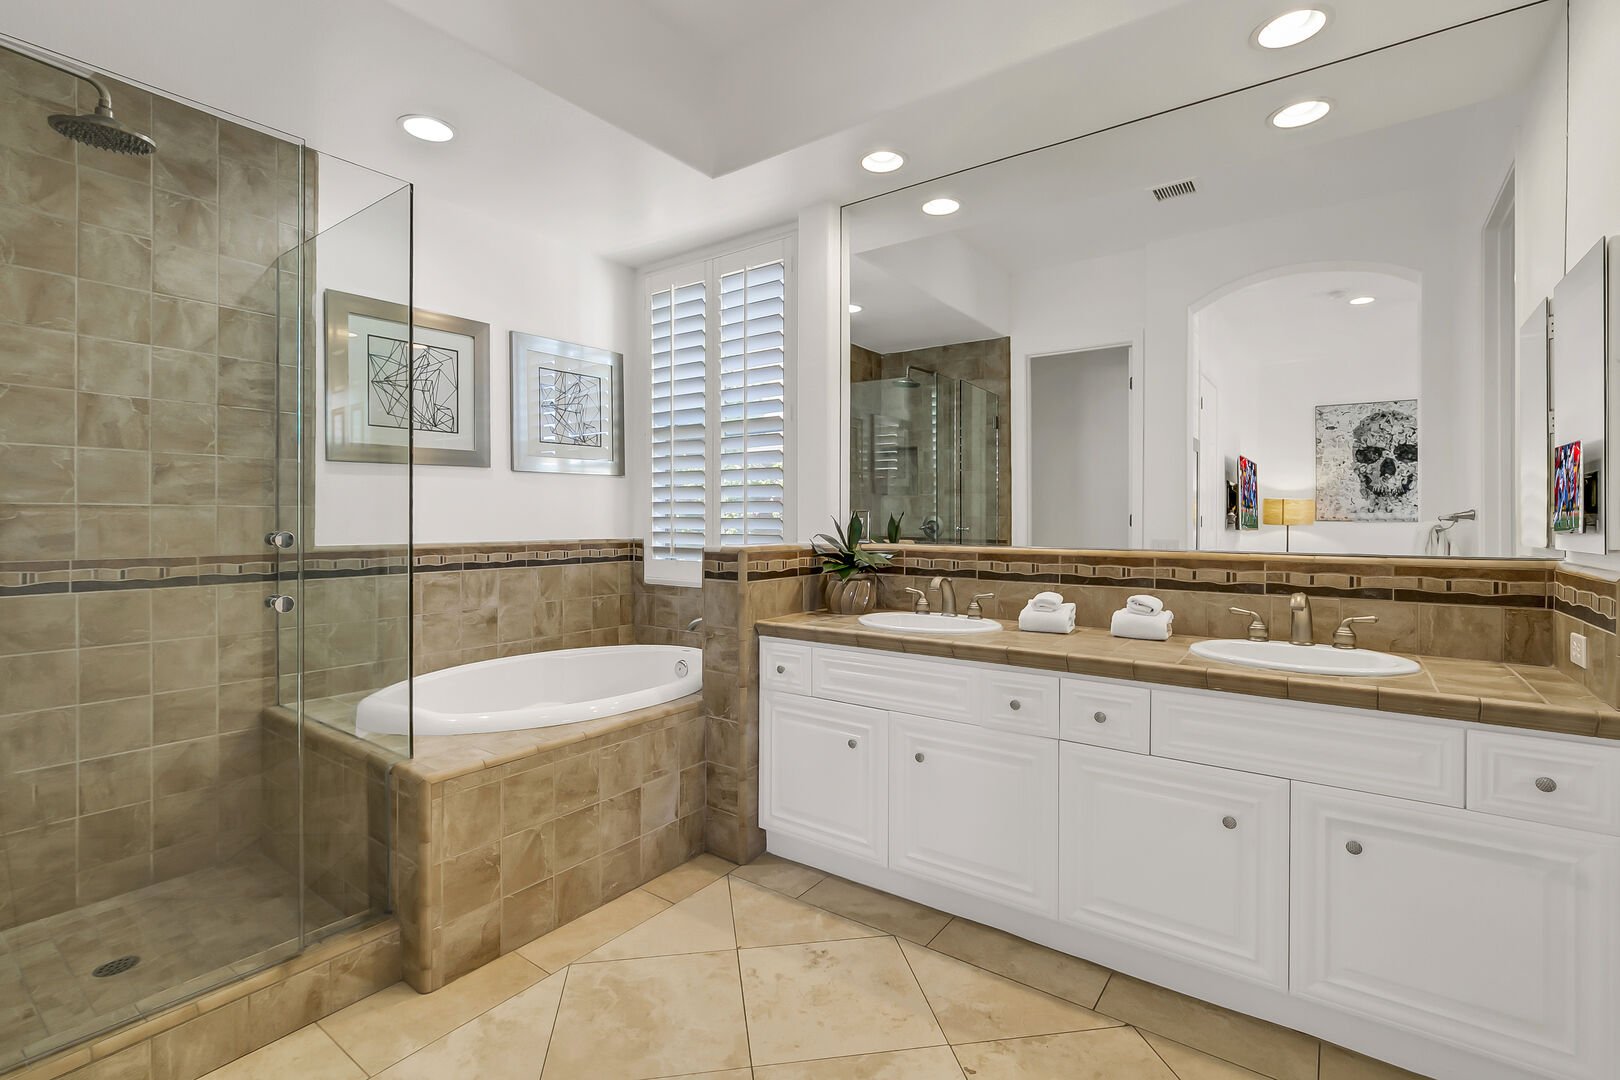 The private en-suite bathroom features a full bath with dual sinks, soaking tub, and plenty of closet space.